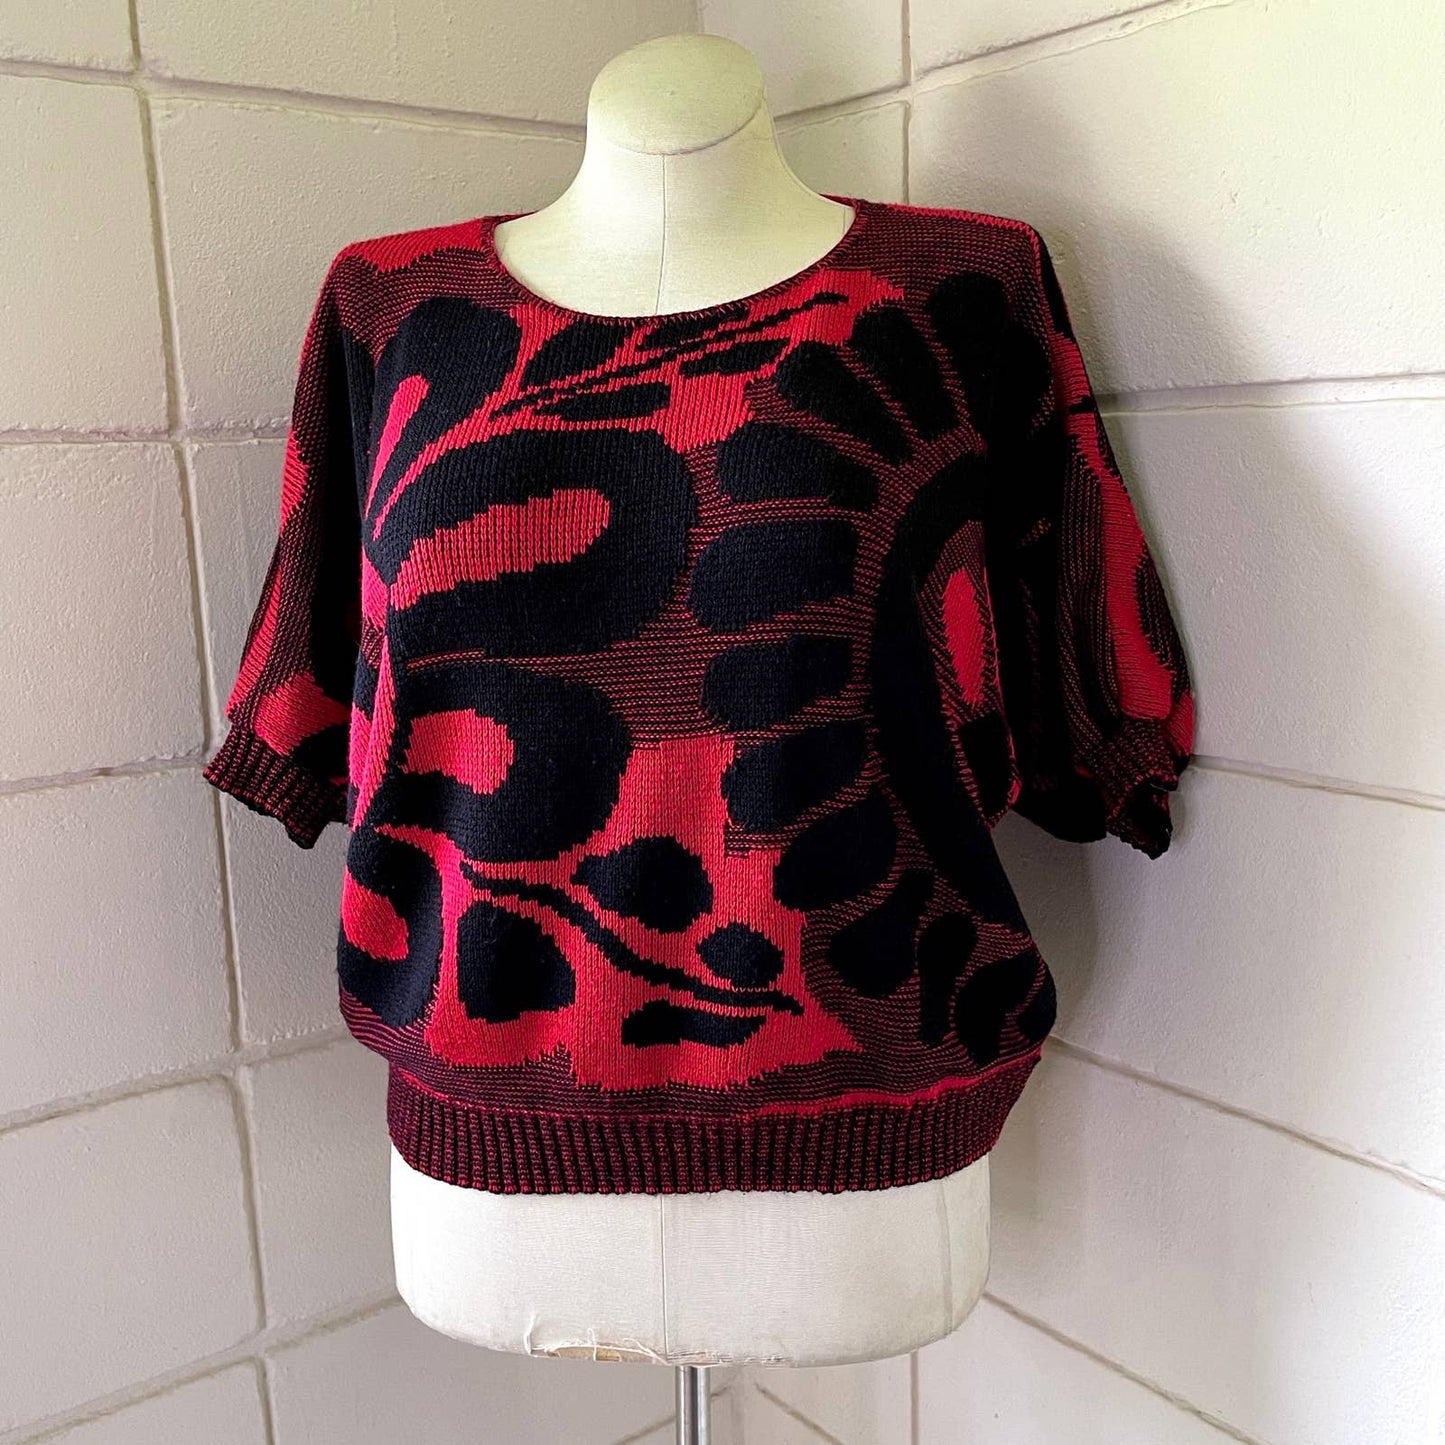 Vintage 80s Black and Red Mod Look Floral Sweater Dolman Short Sleeves Size M L